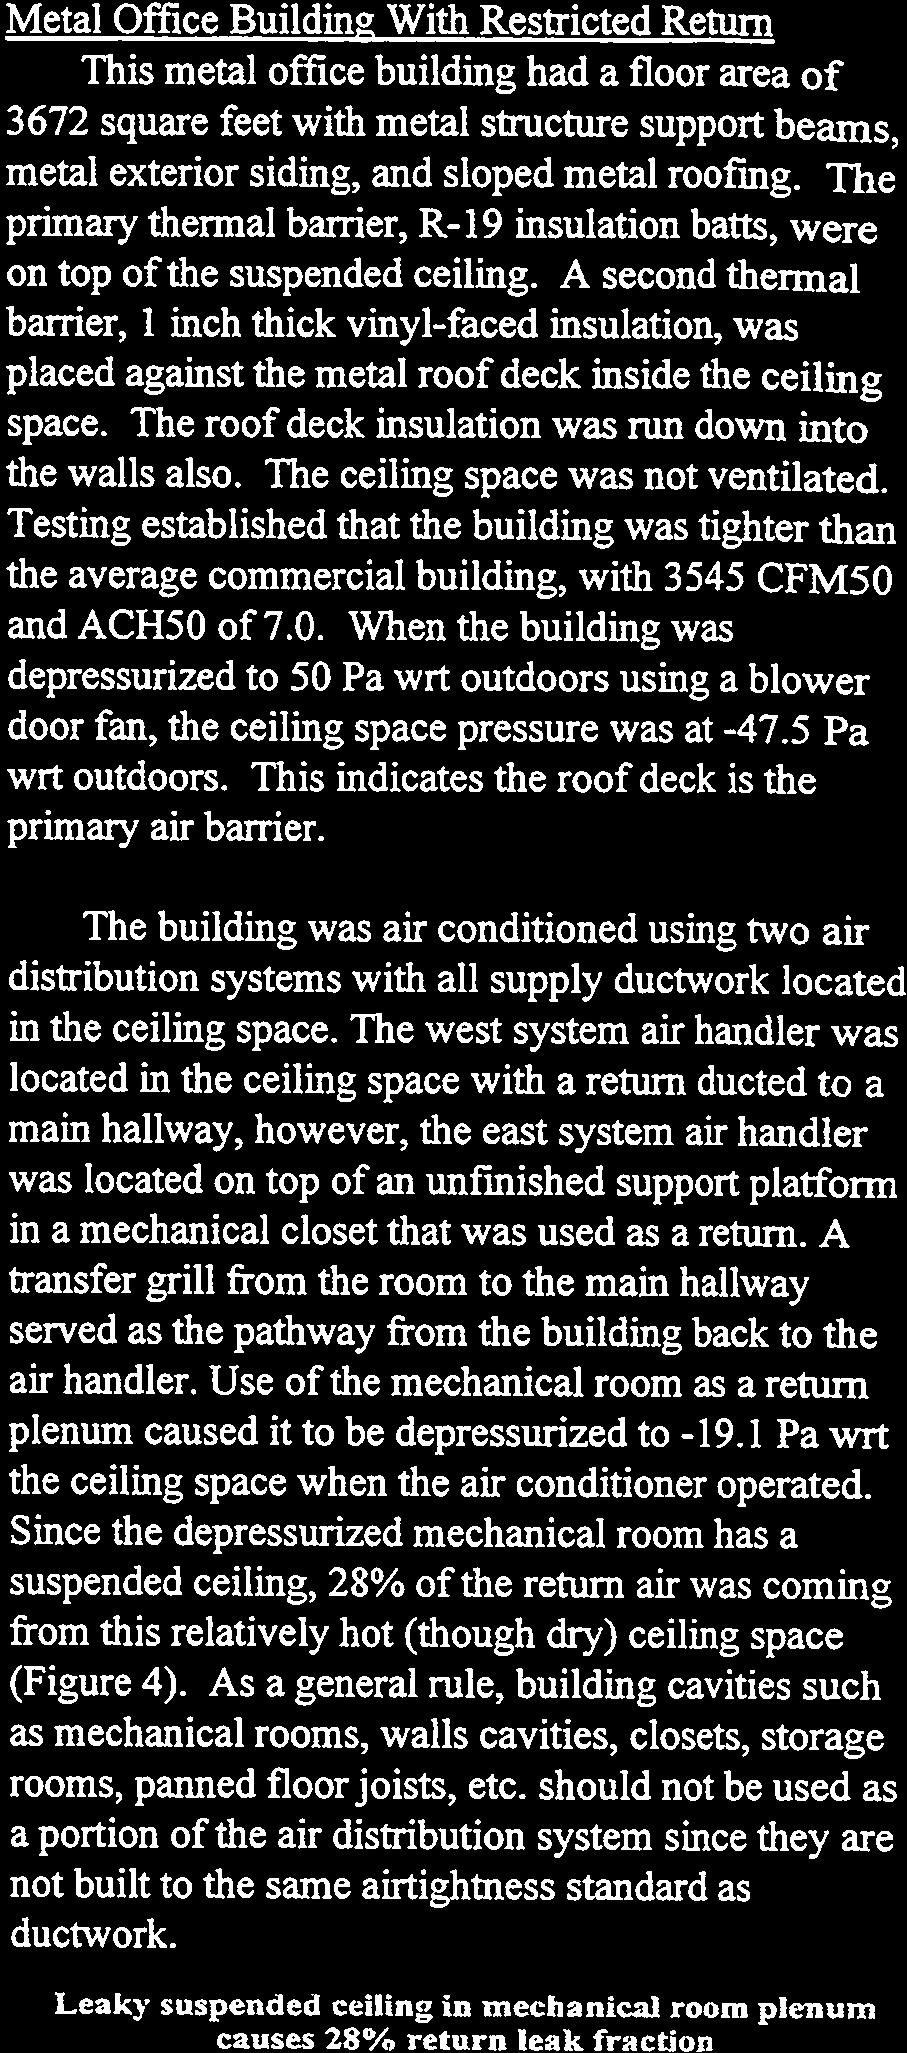 7 Pa due to the unbalanced exhaust air of the building. This caused the ceiling space to also be depressurized about the same amount.